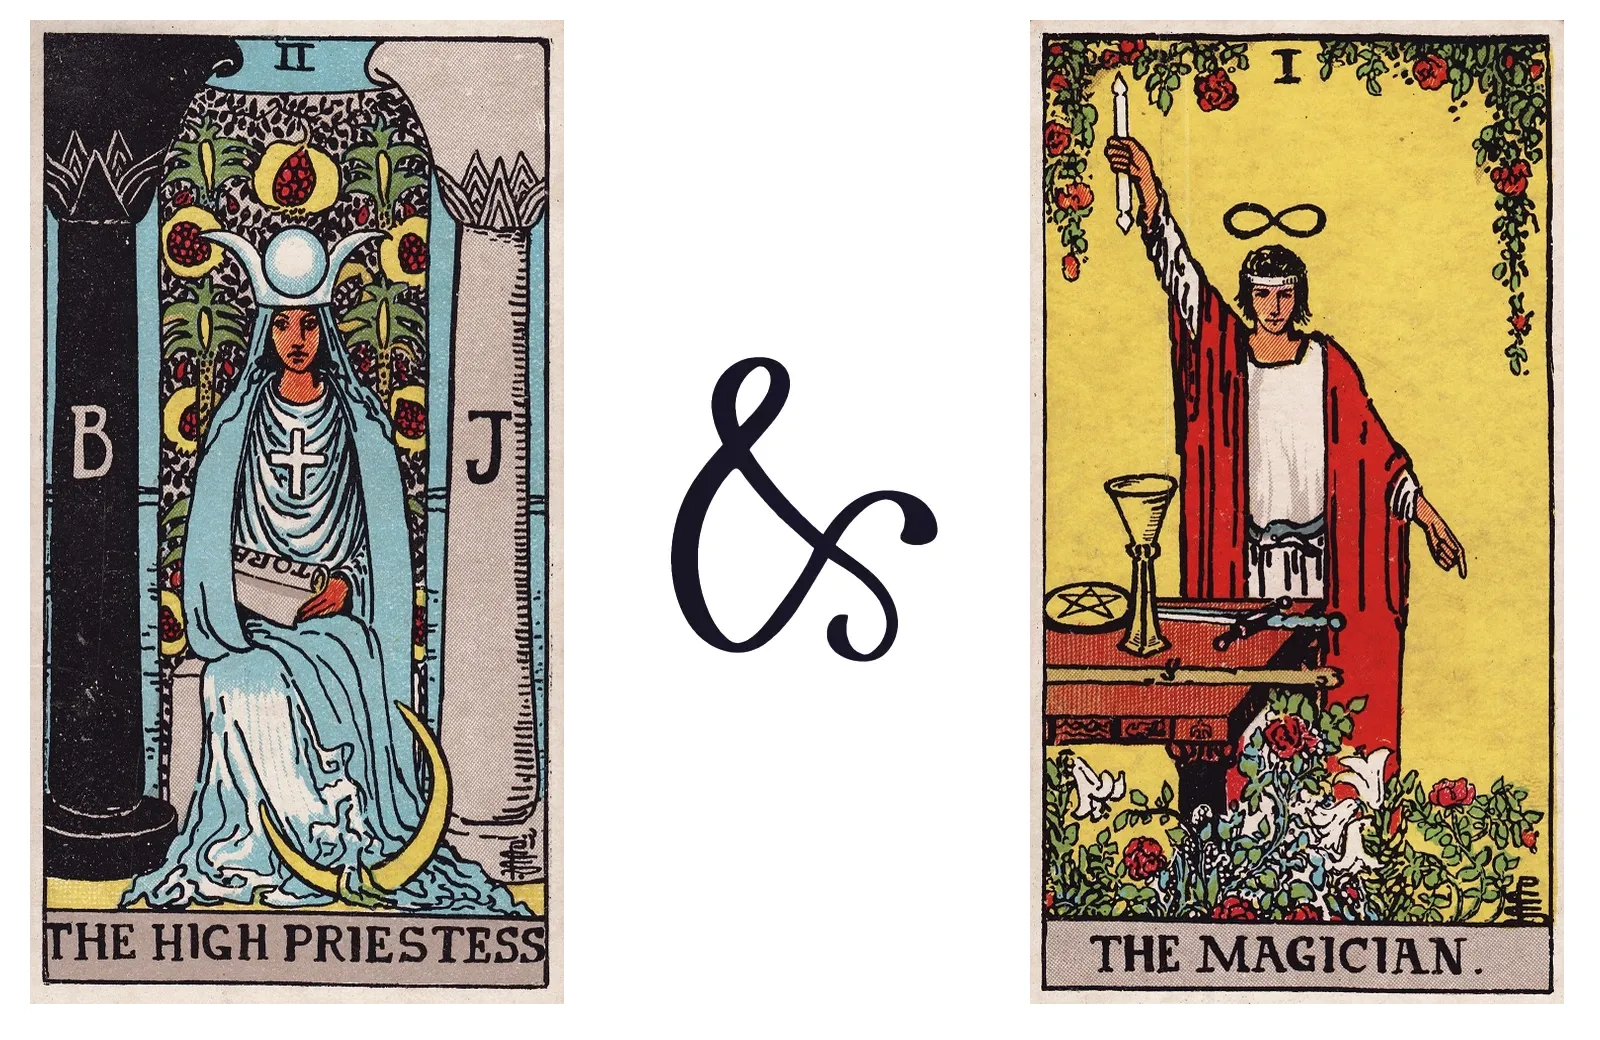 The High Priestess and The Magician